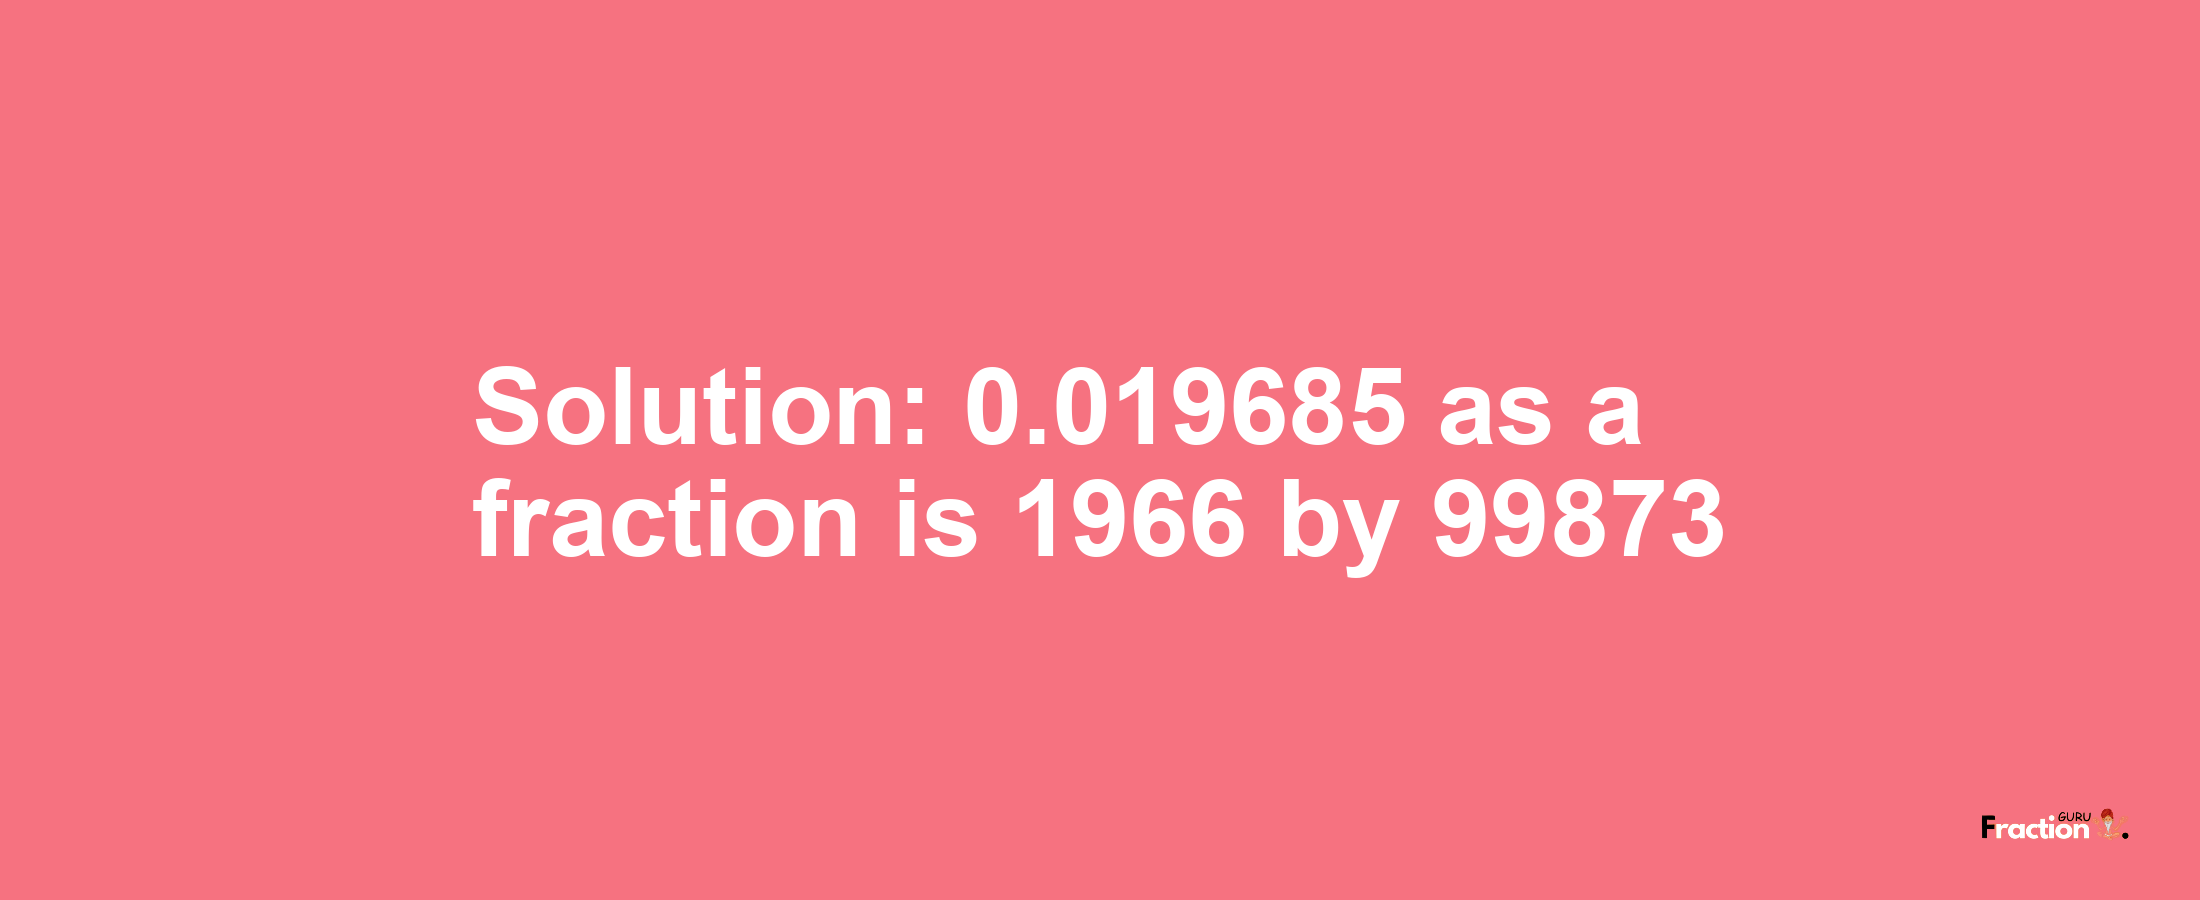 Solution:0.019685 as a fraction is 1966/99873